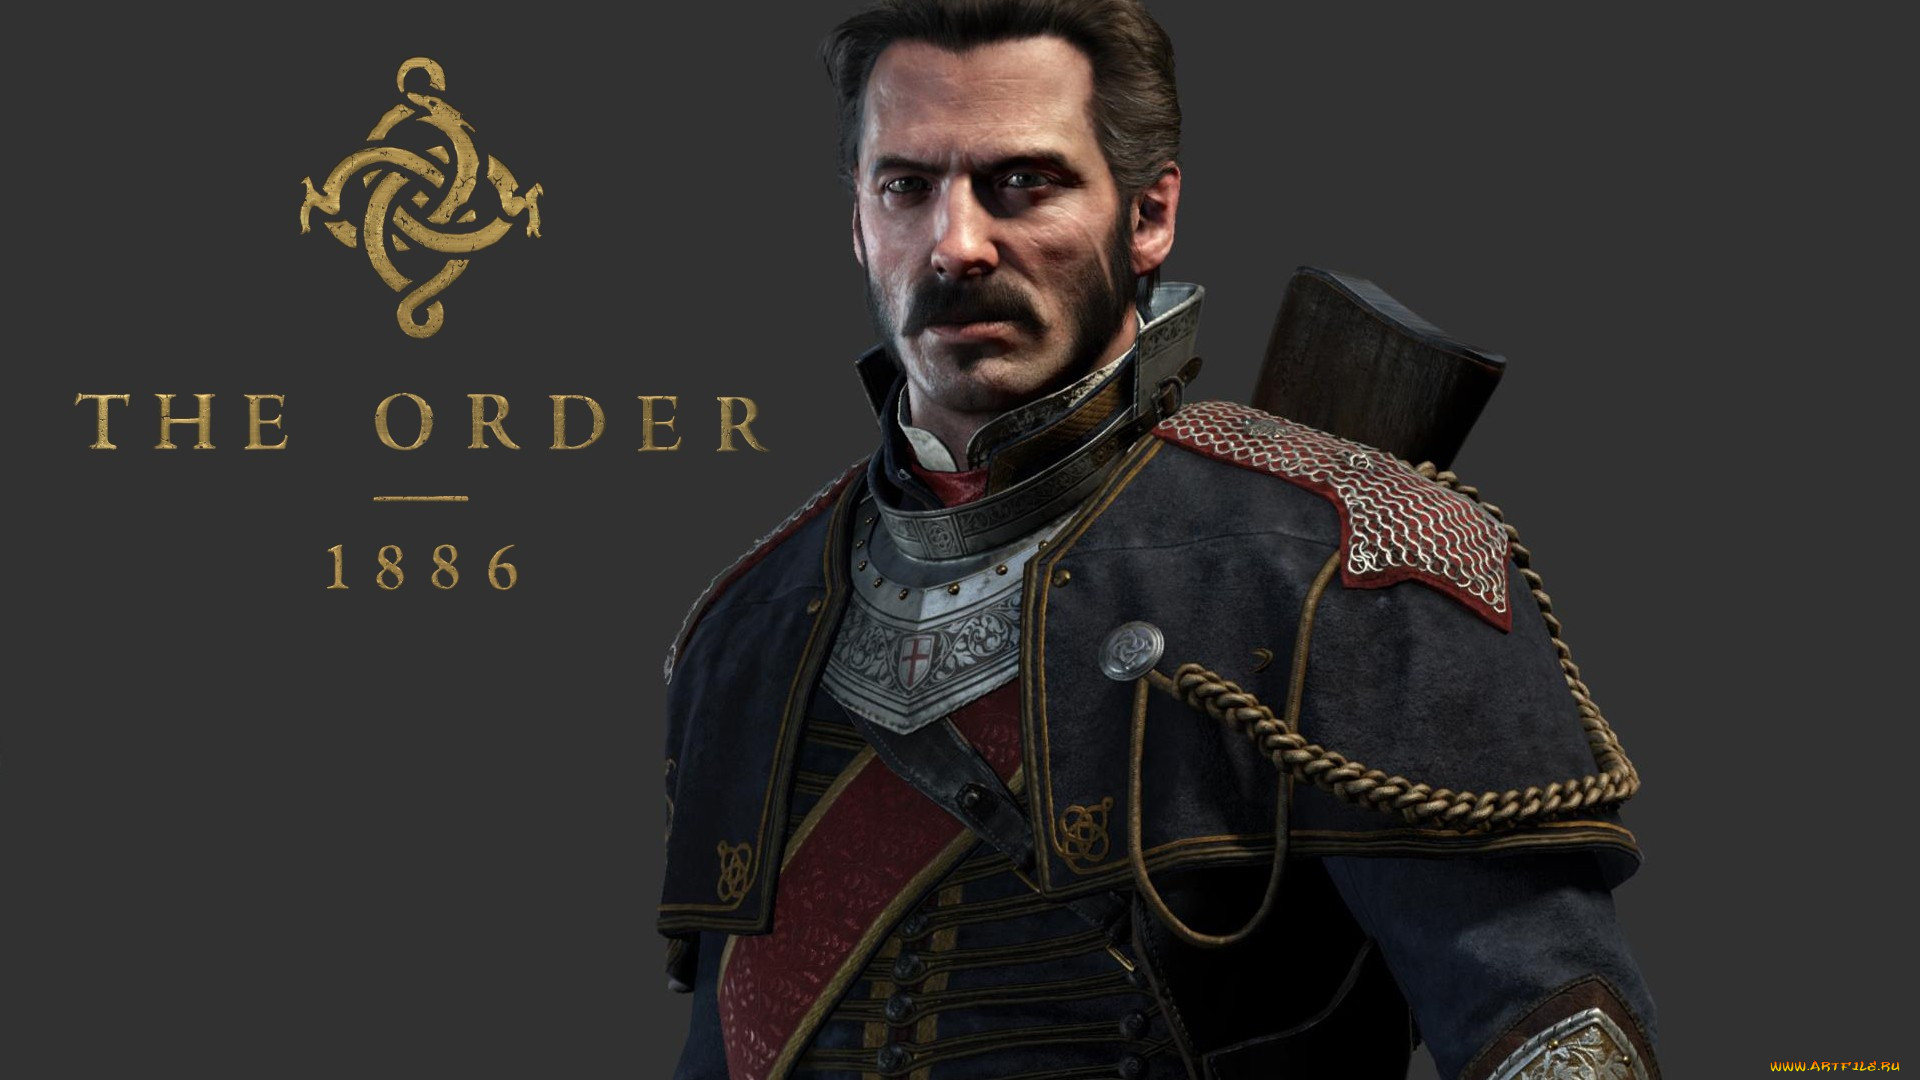  , the order,  1886, the, , , , order, 1886, 